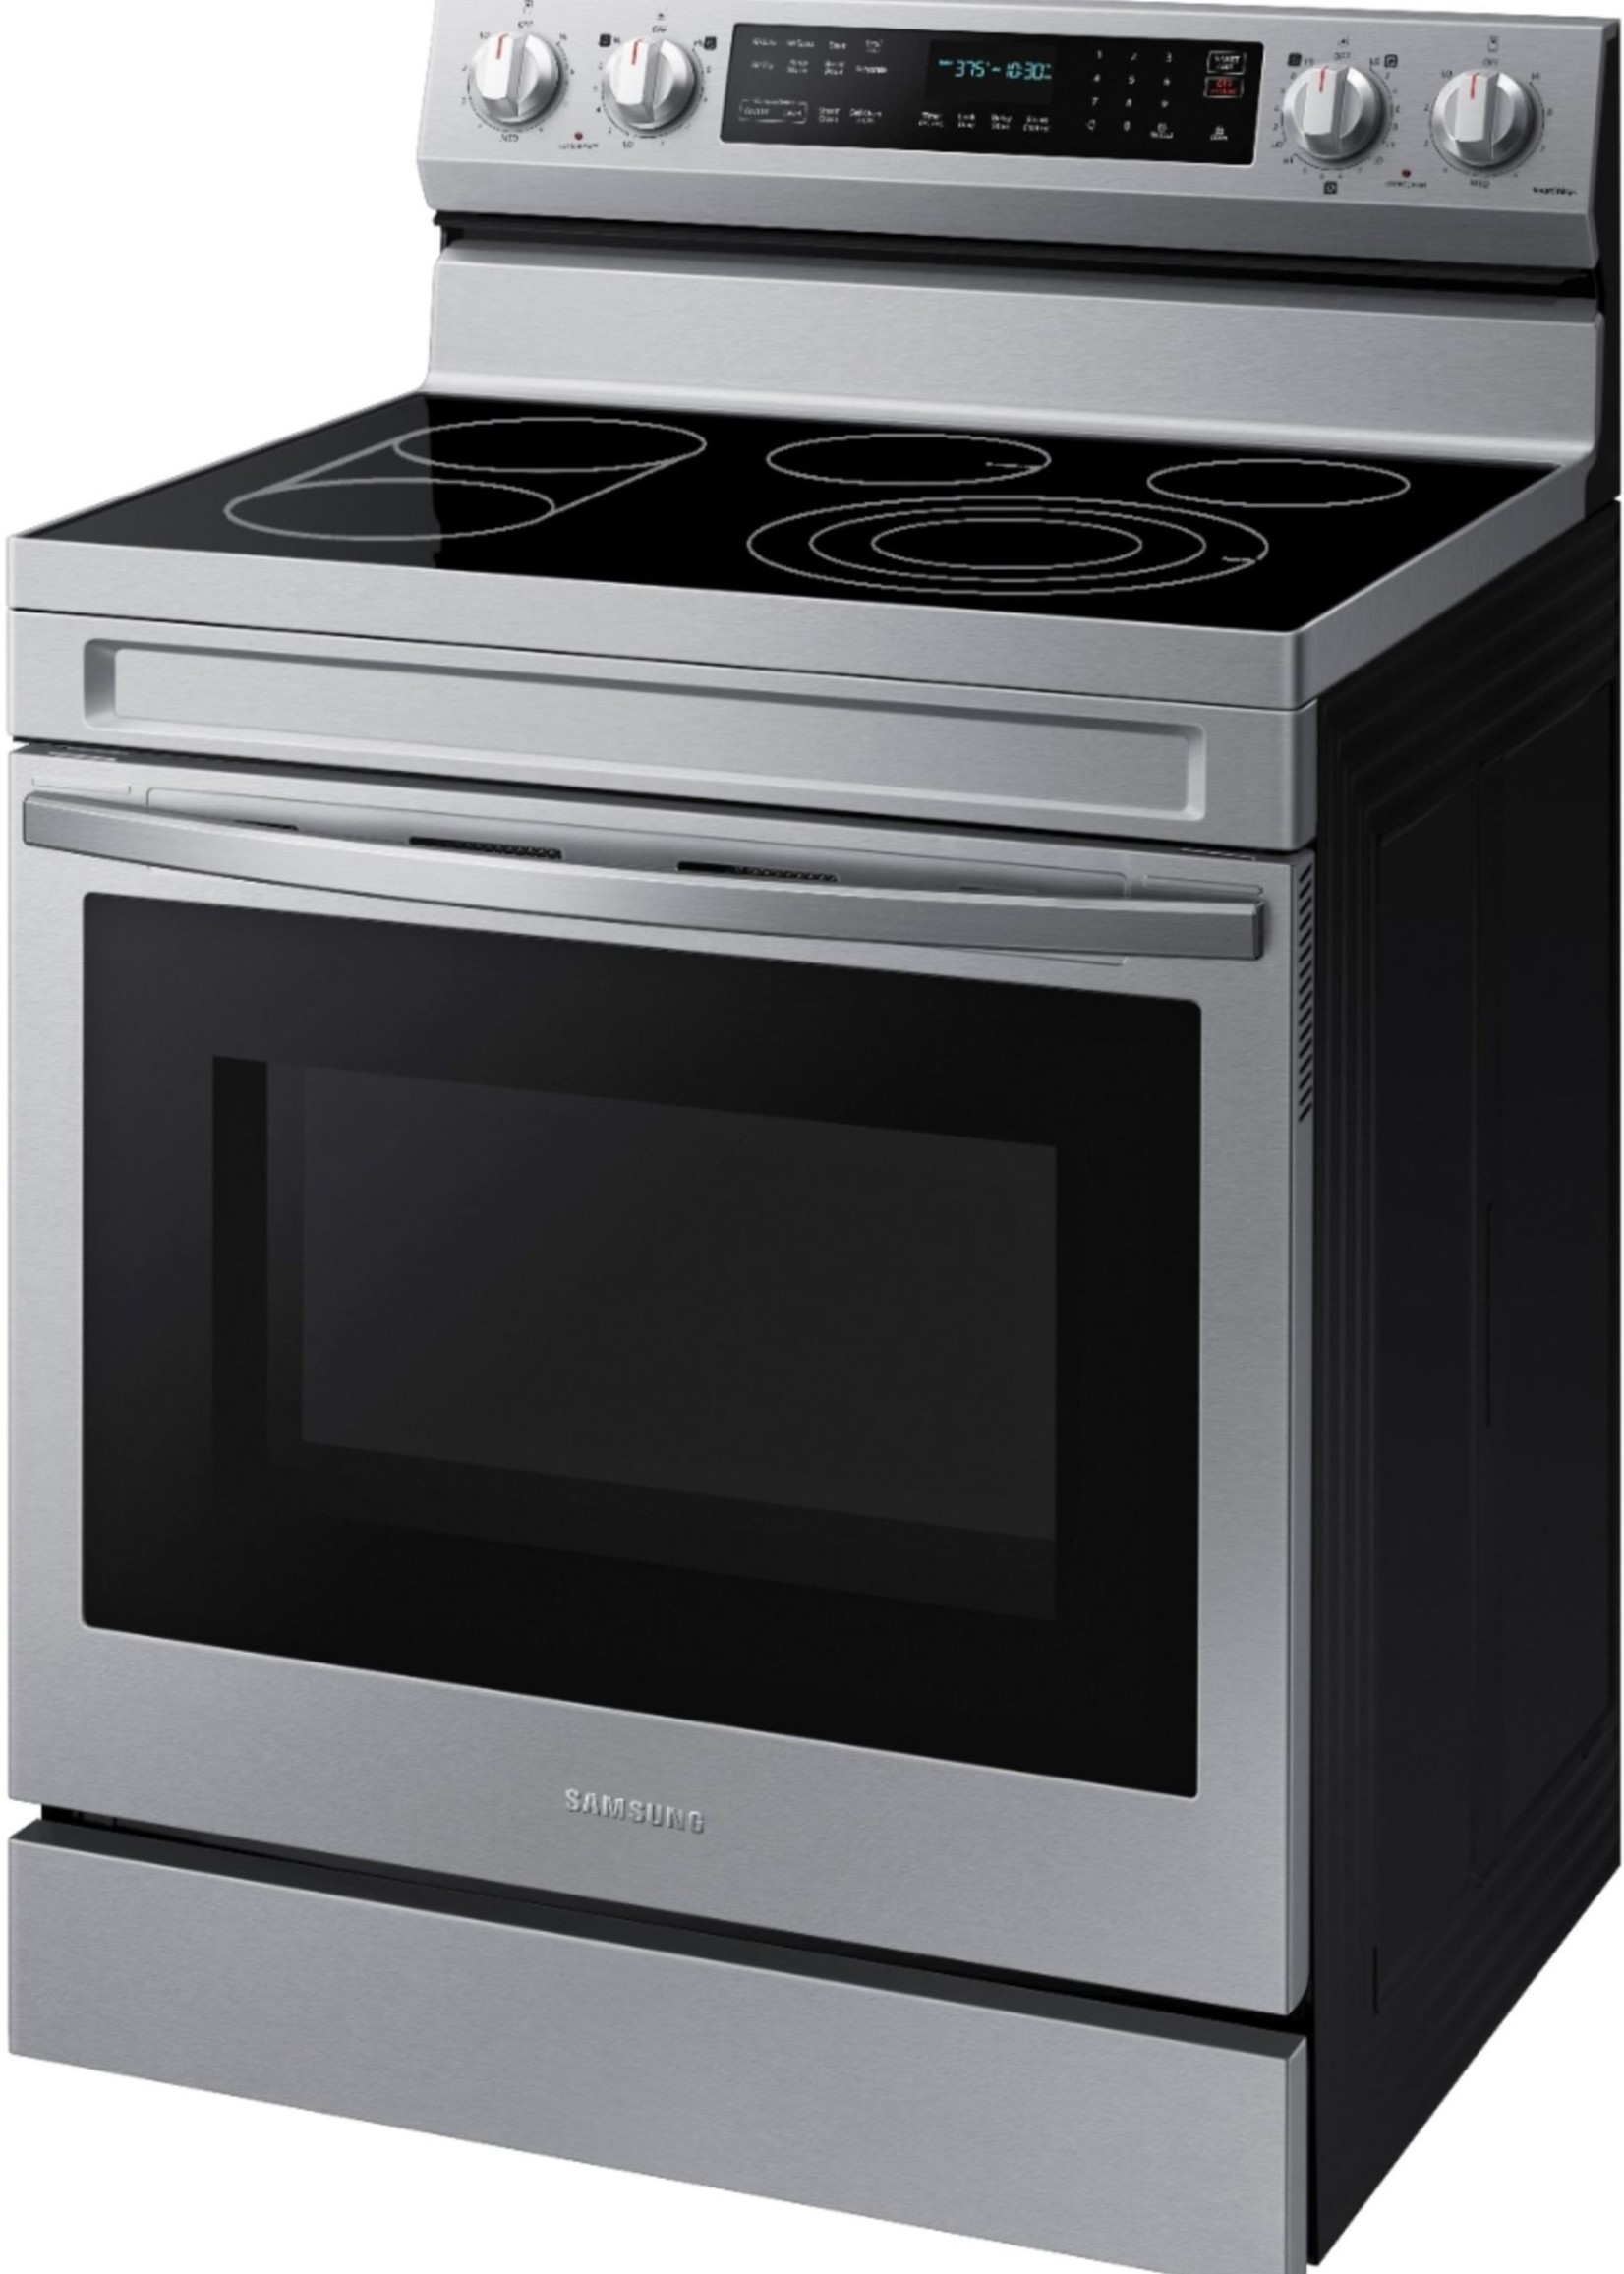 Samsung *Samsung NE63A6711SS  6.3 cu. ft. Freestanding Electric Convection+ Range with WiFi, No-Preheat Air Fry and Griddle - Fingerprint Resistant Stainless Steel